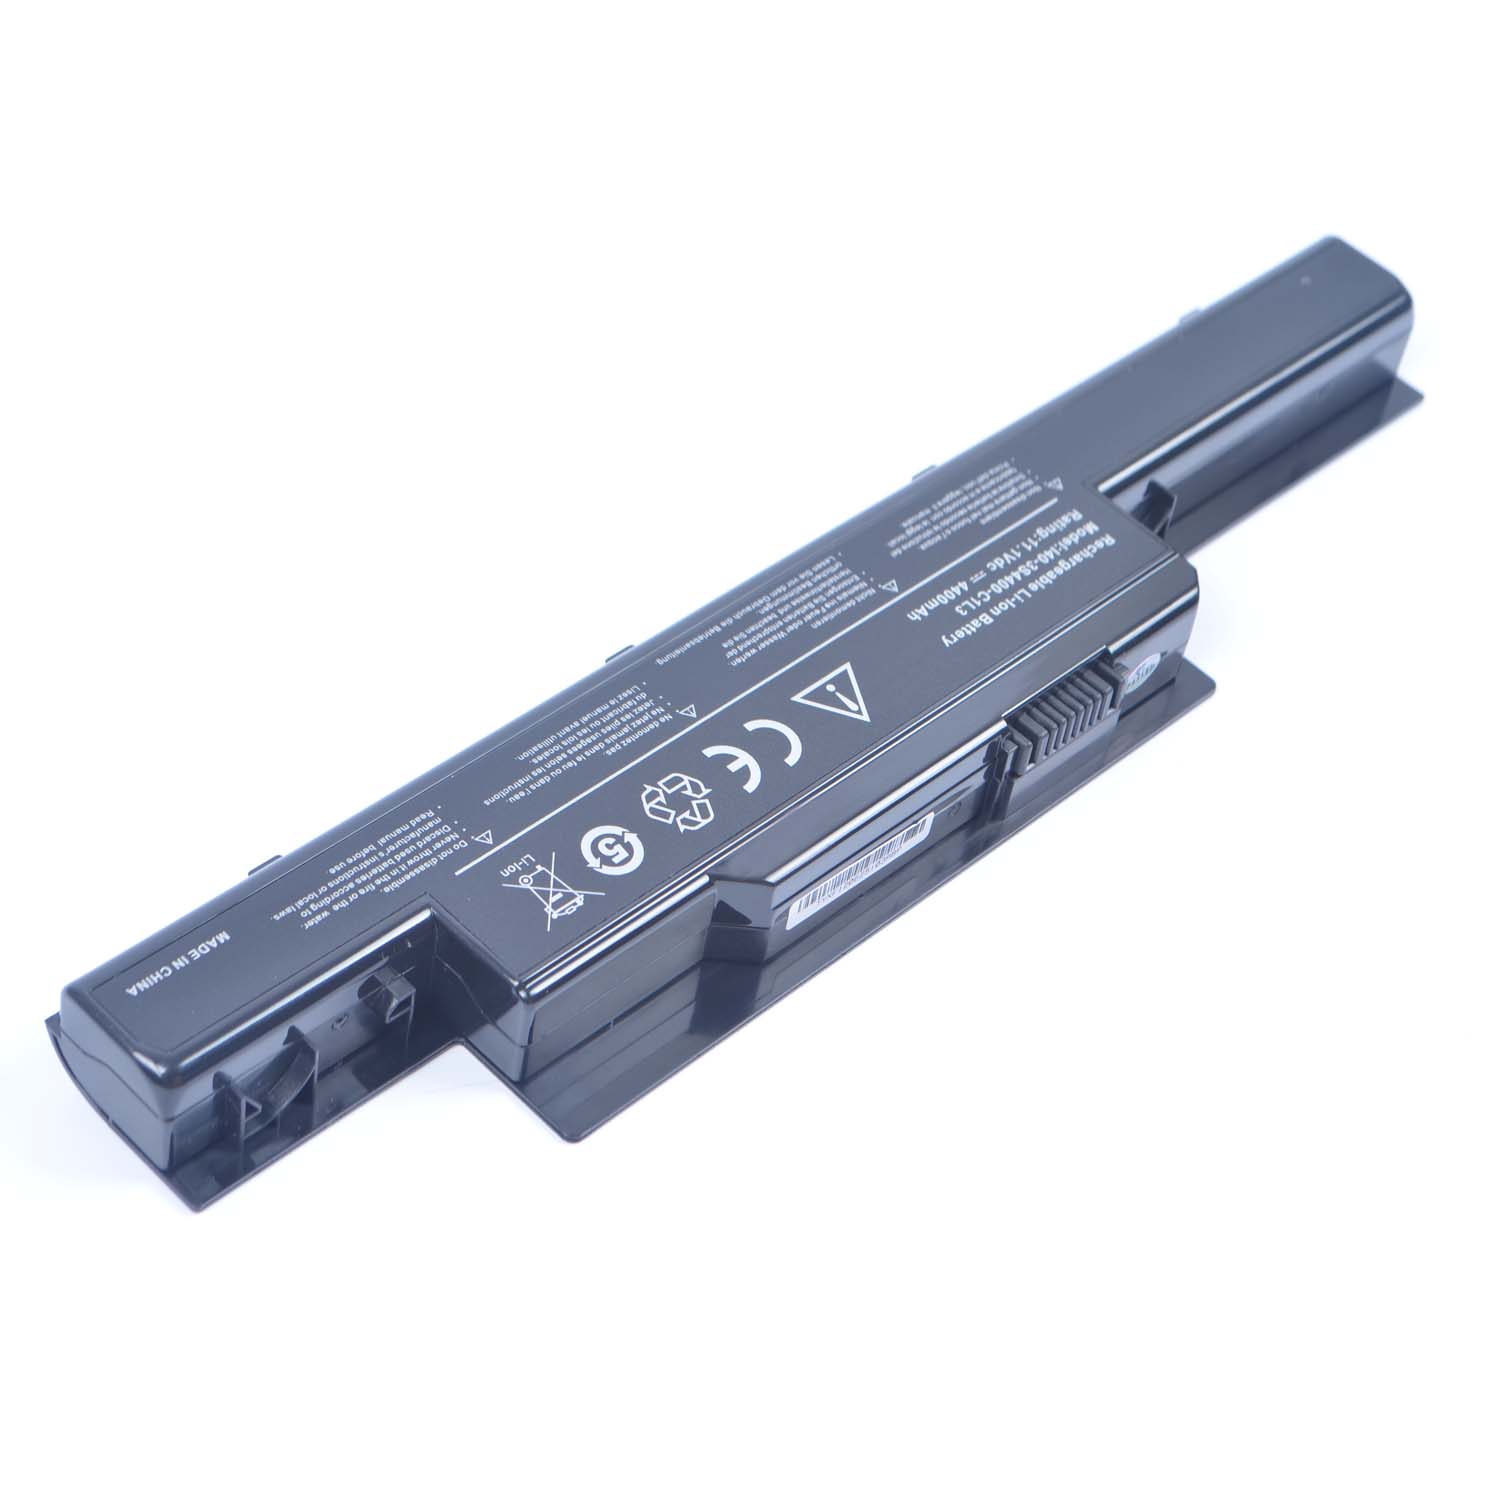 Replacement Battery for UNIWILL I40-4S2200-G1L3 battery